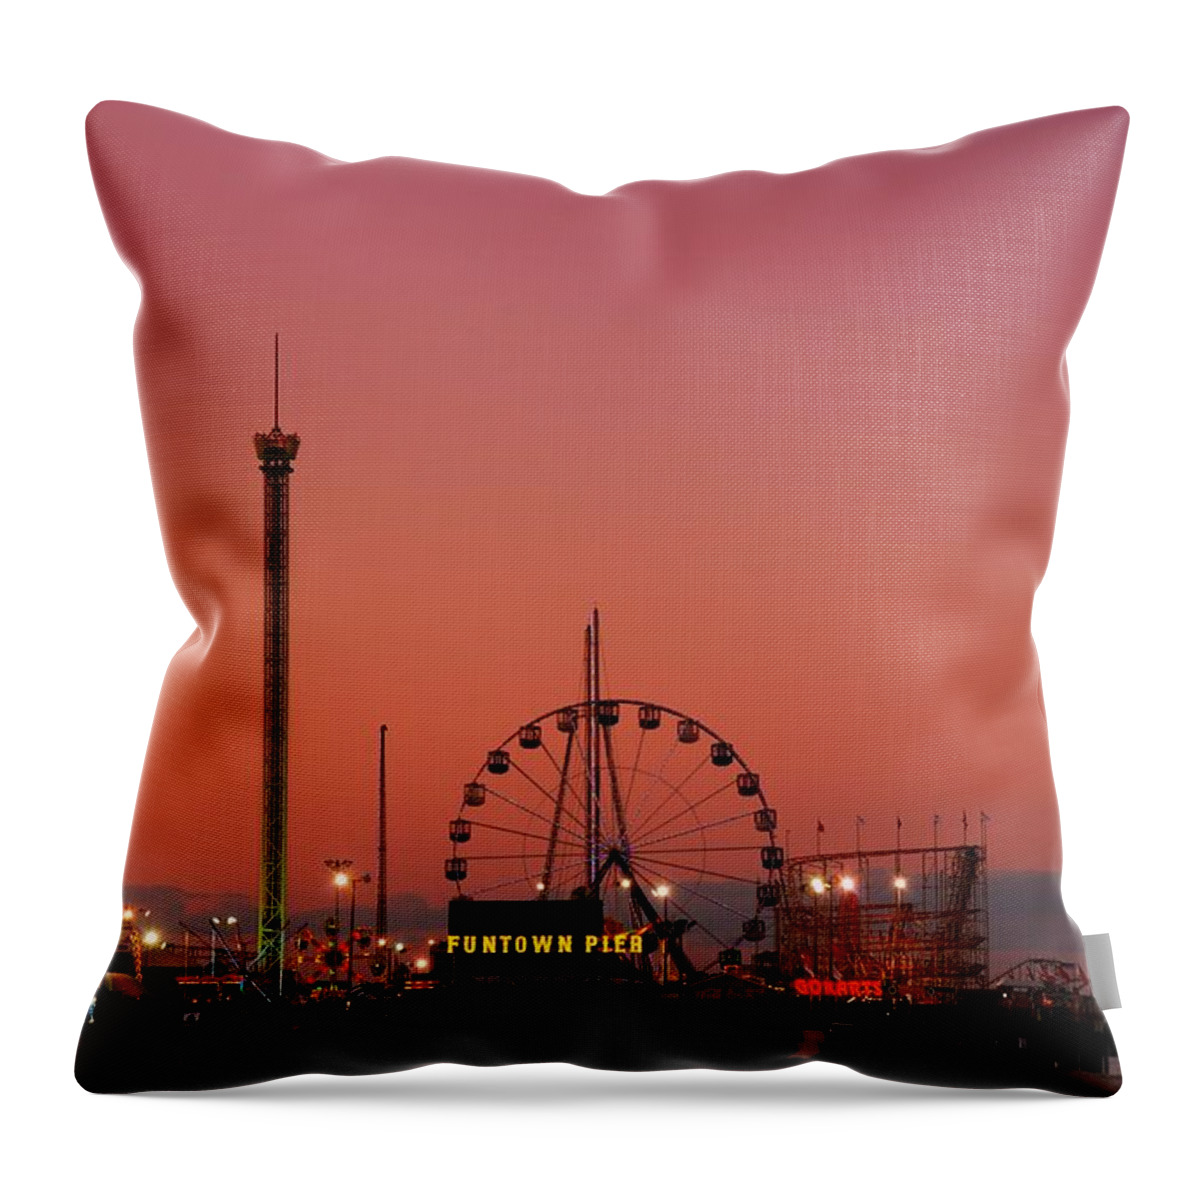 Amusement Parks Throw Pillow featuring the photograph Funtown Pier At Sunset II - Jersey Shore by Angie Tirado